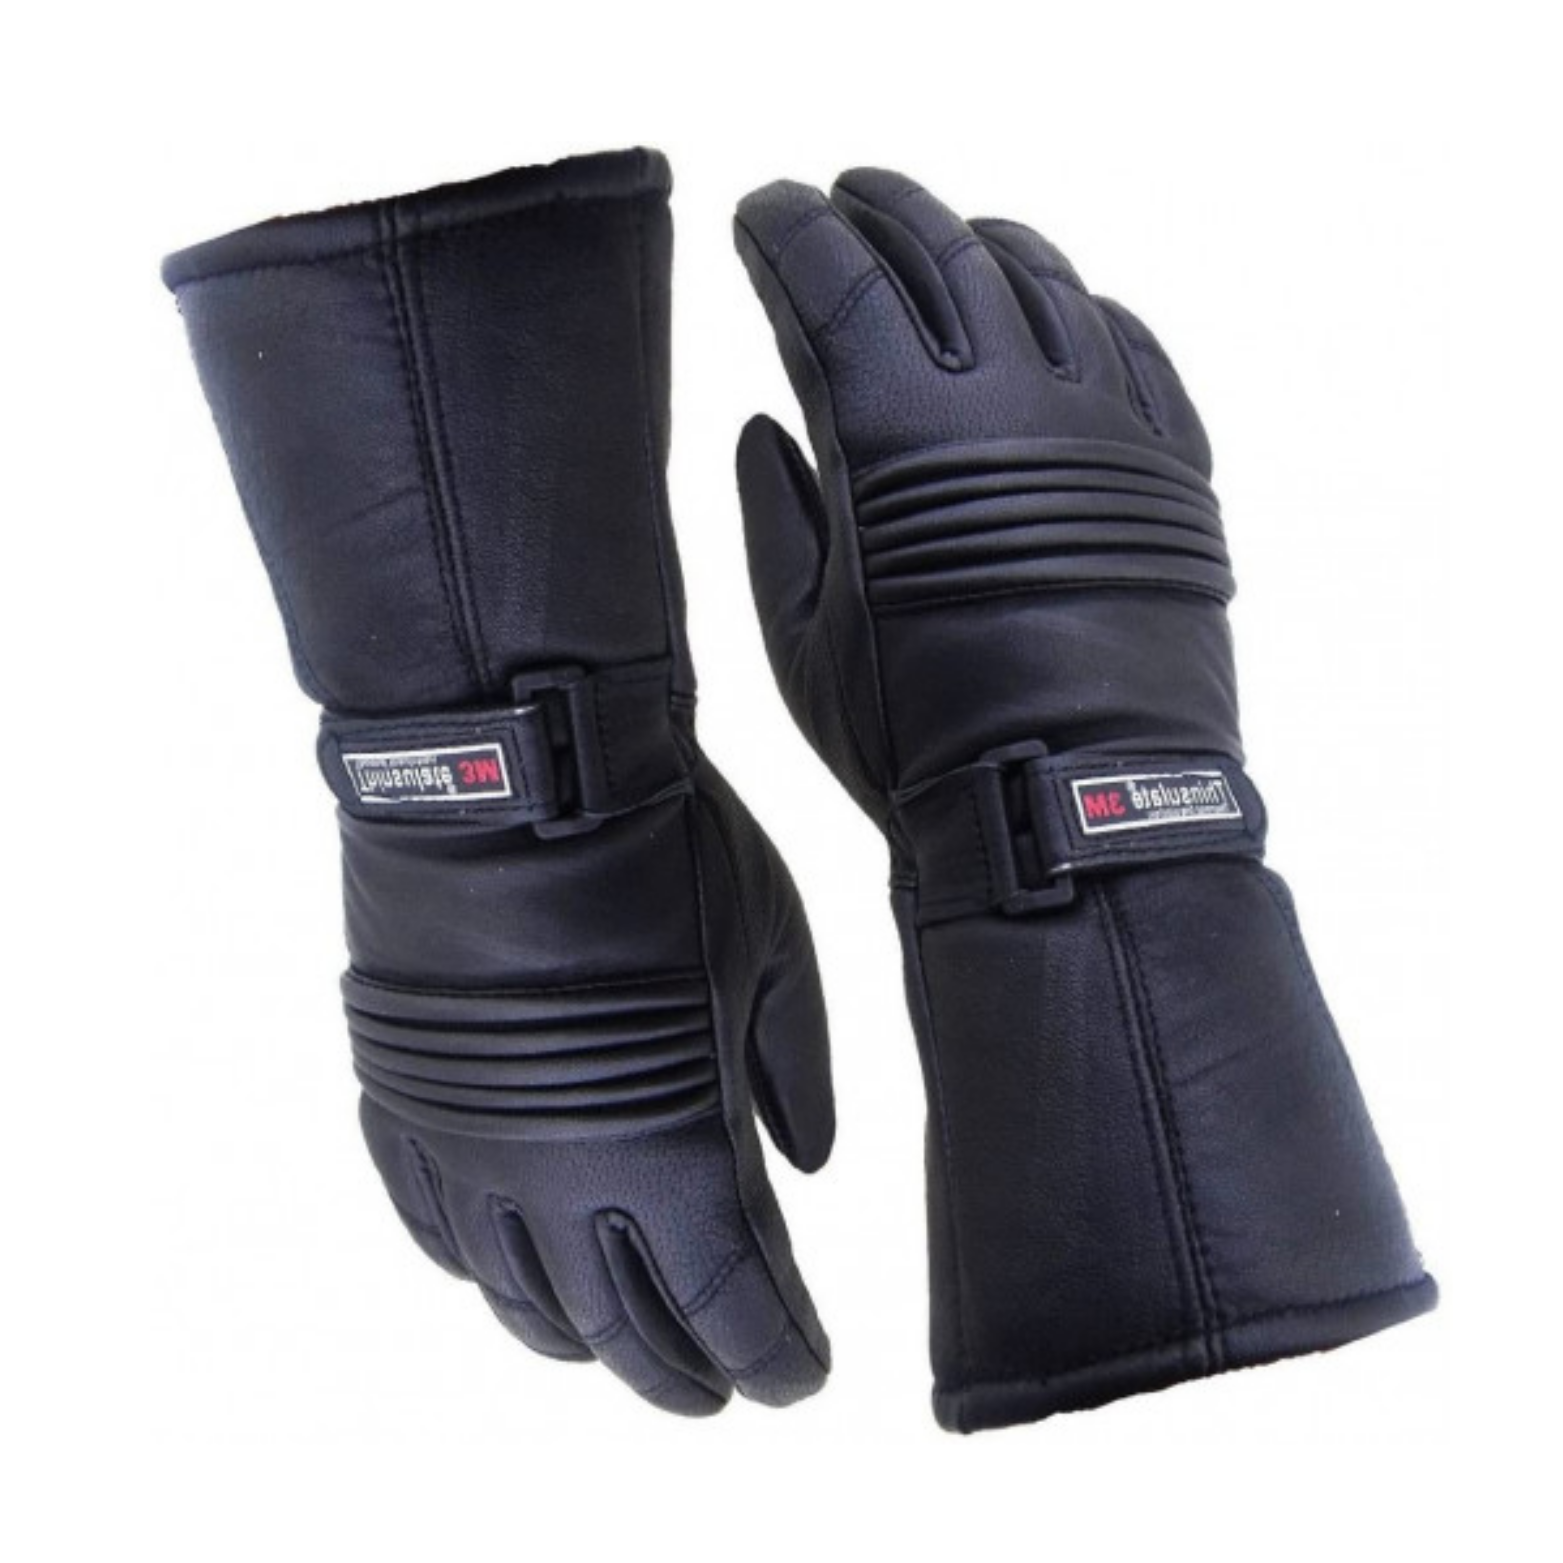 3m thinsulate leather glove xxl waterproof/breathable black 4302543-xxl